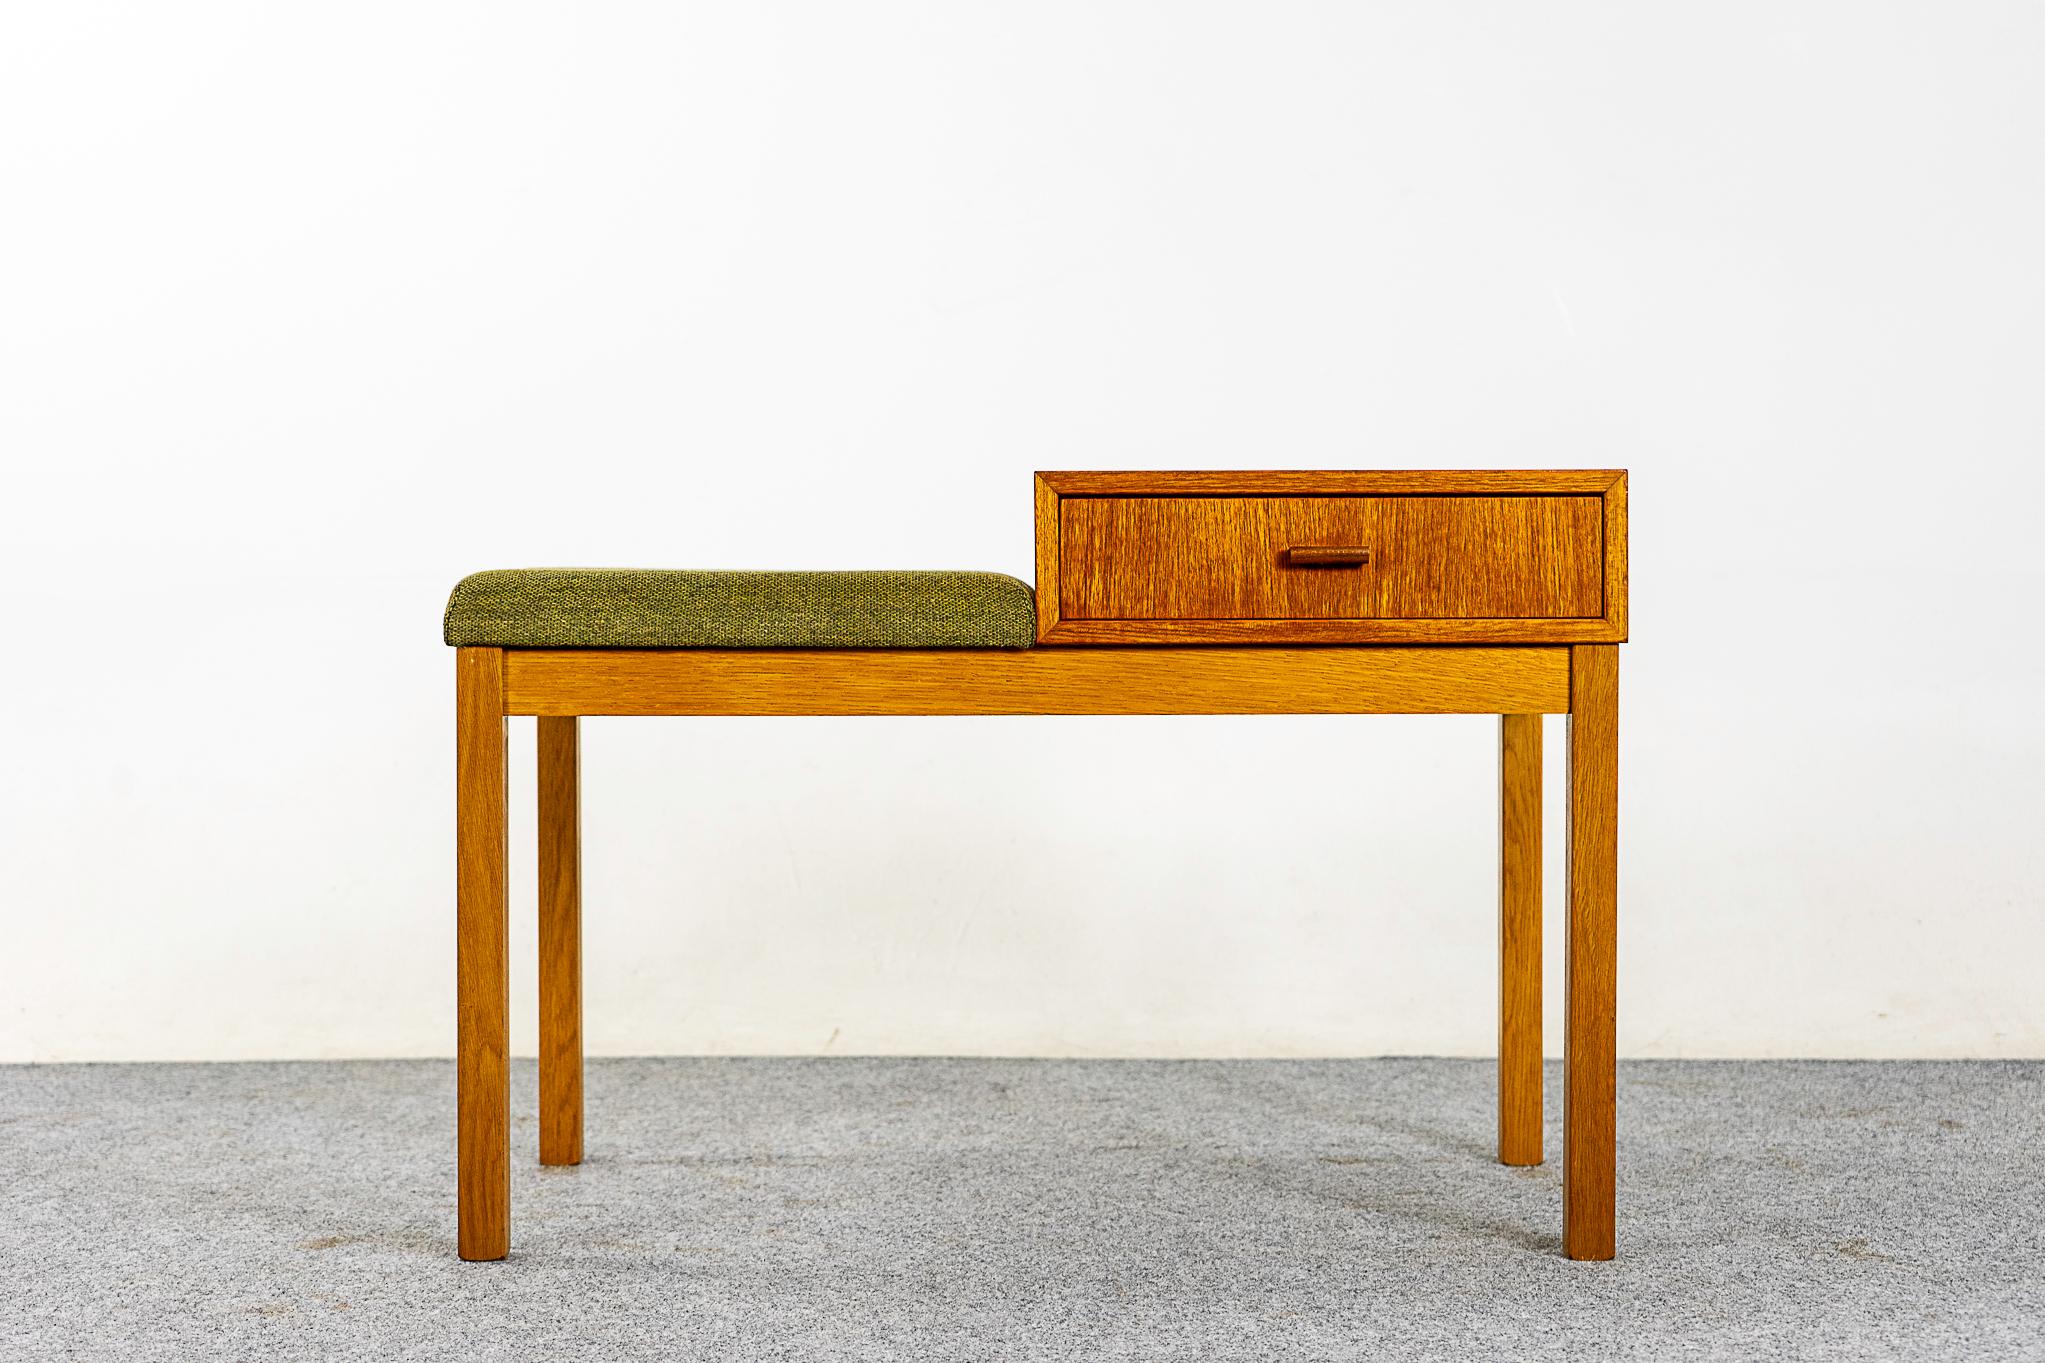 Teak & oak Mid-Century Modern bench, circa 1960s. Versatile bench can have the seat on either side. Handy drawer to hide away clutter. Simple and sleek. Original upholstery with minor wear.

Original condition, minor marks consistent with